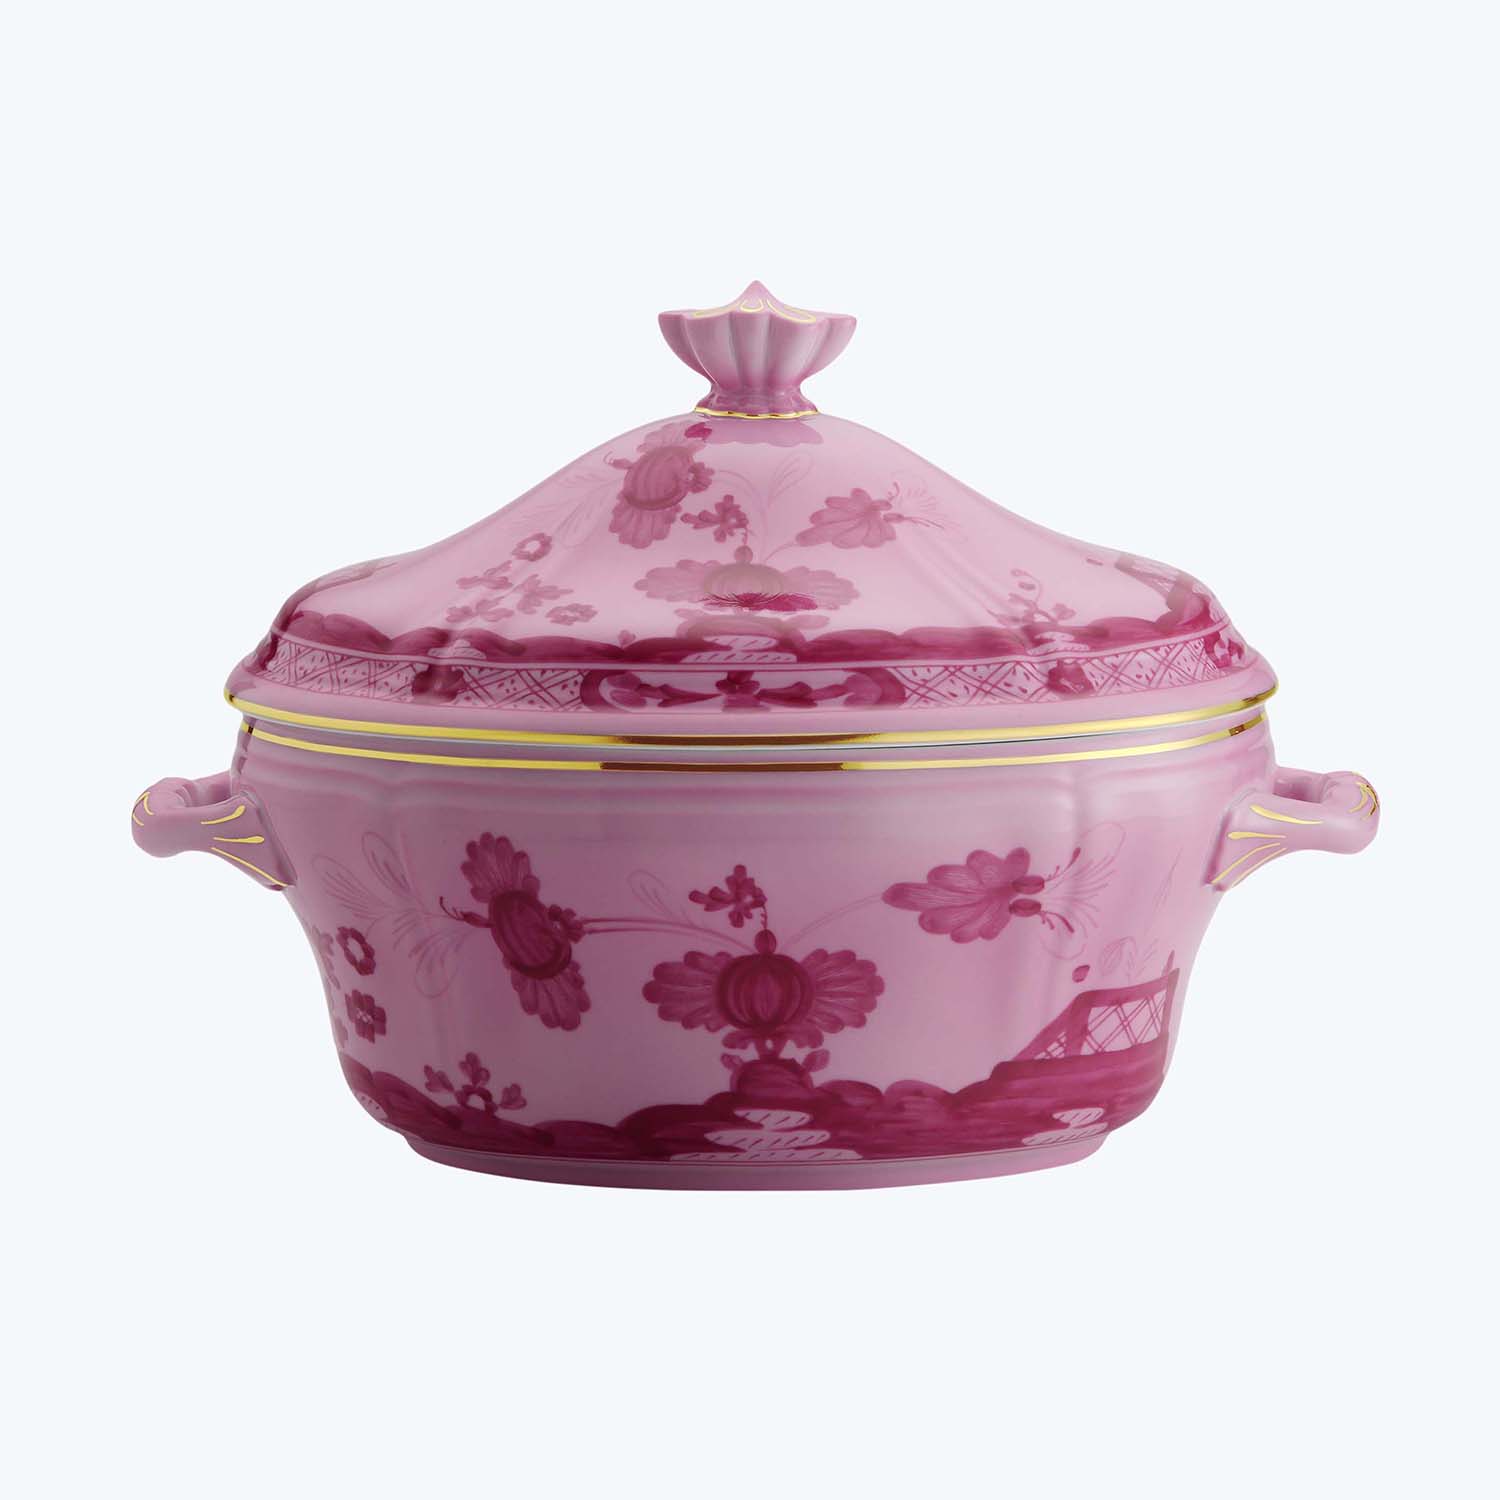 Vibrant pink decorative pot with floral patterns and elegant accents.